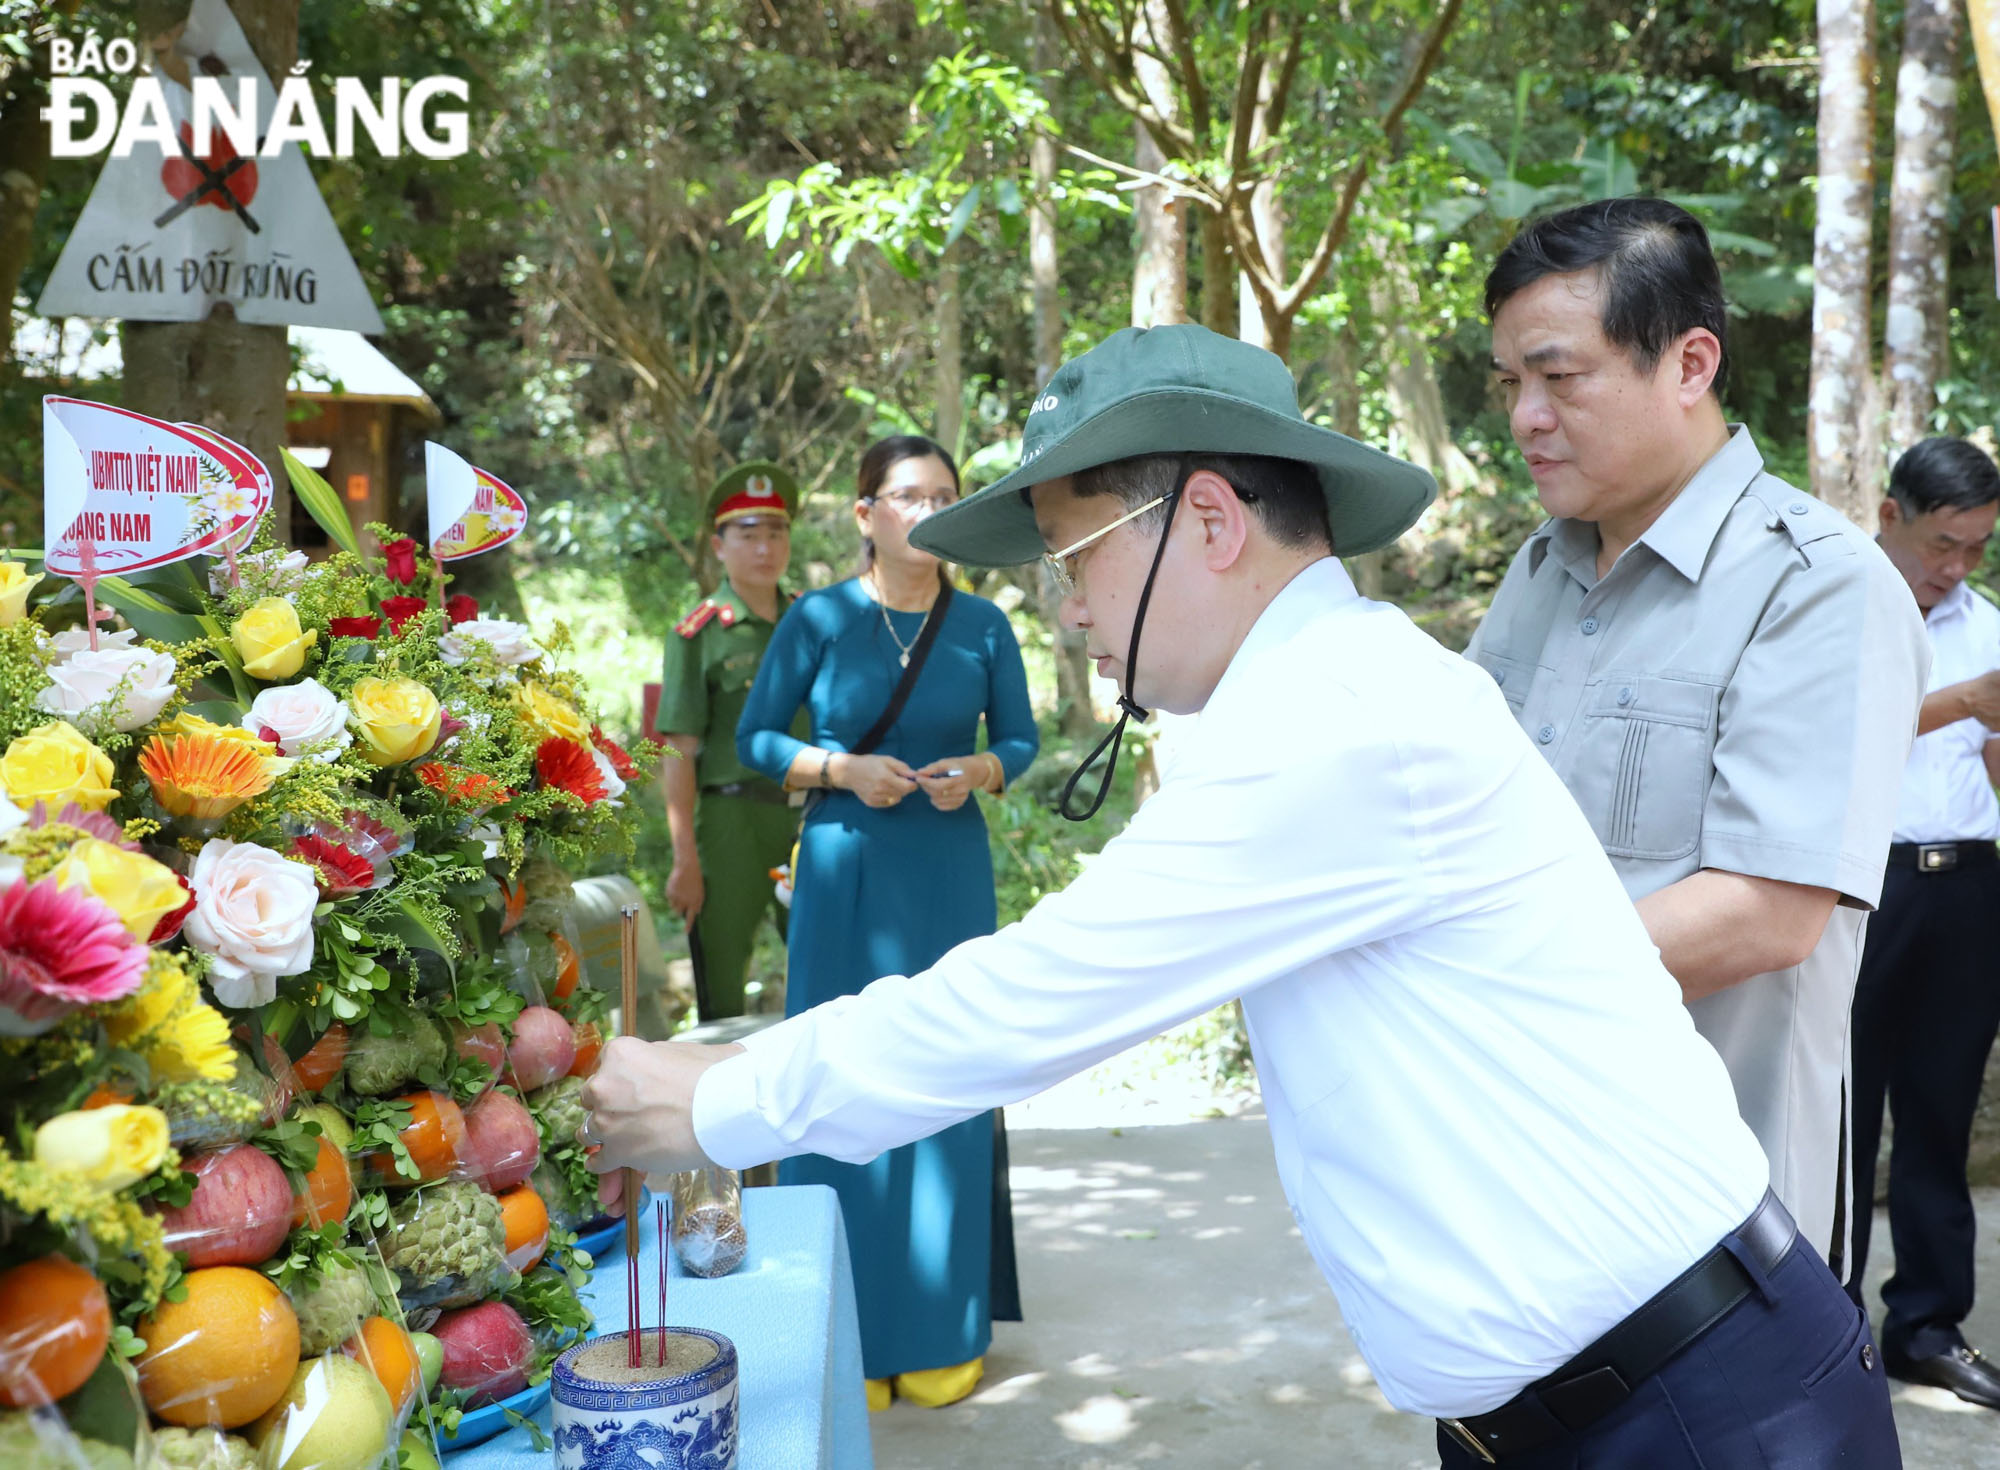  Da Nang Party Committee SecretaryNguyen Van Quang offers incense at the relic of the former Quang Da Special Zone in Duy Son Commune, Duy Xuyen District, Quang Nam Province, April 25, 2022. Photo: NGOC PHU